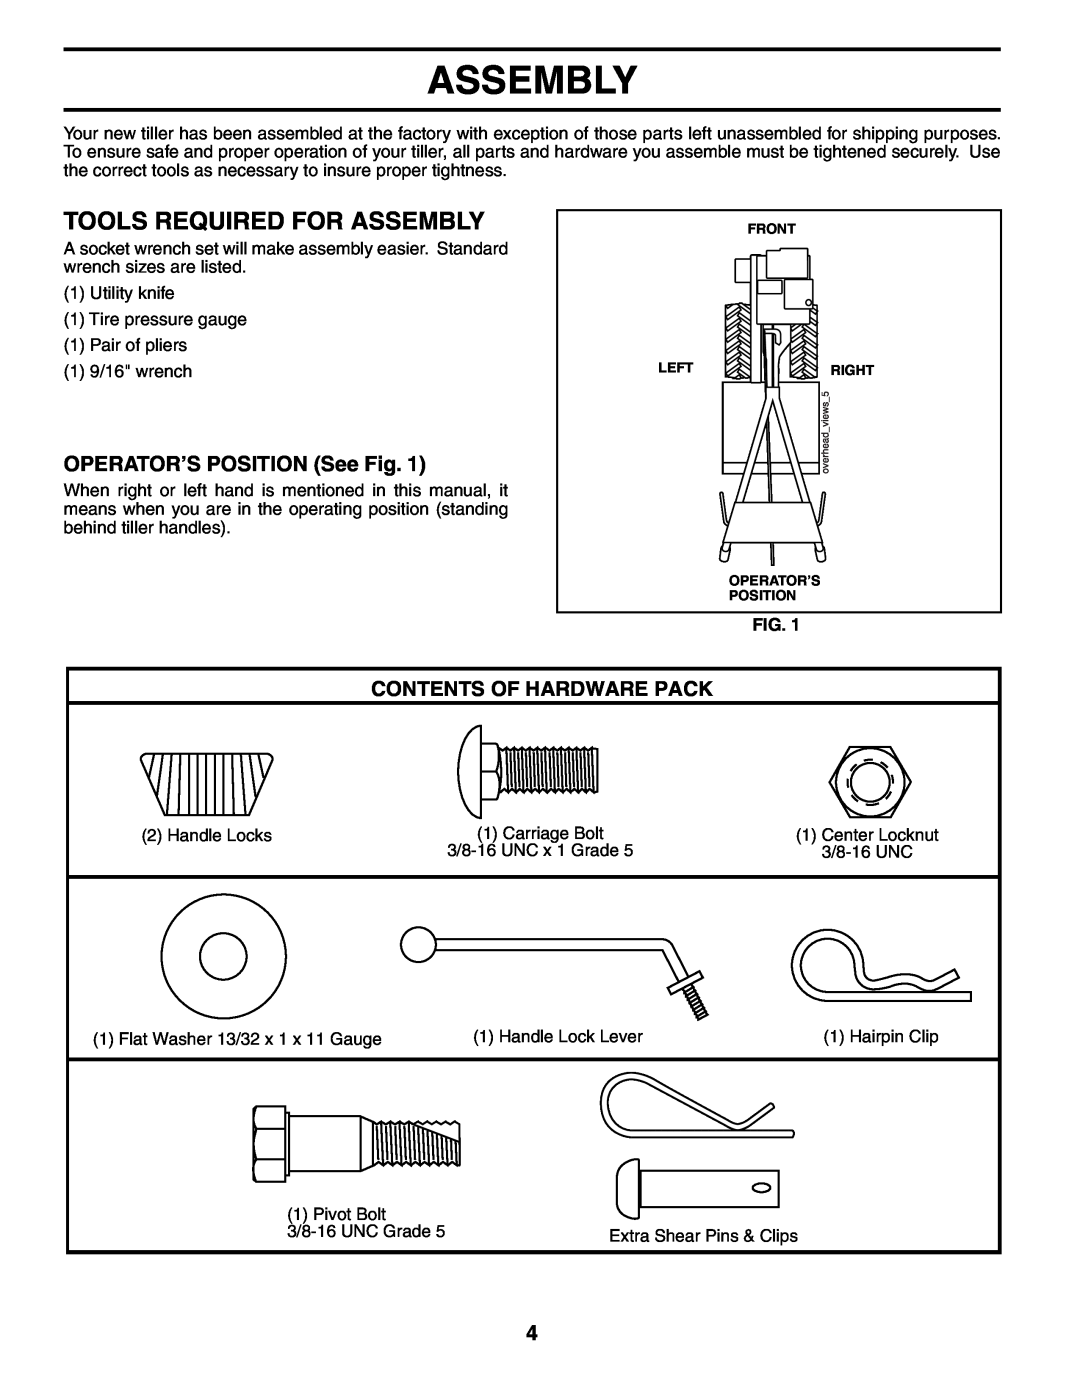 Poulan 190388 owner manual Tools Required For Assembly, OPERATOR’S POSITION See Fig, Contents Of Hardware Pack 